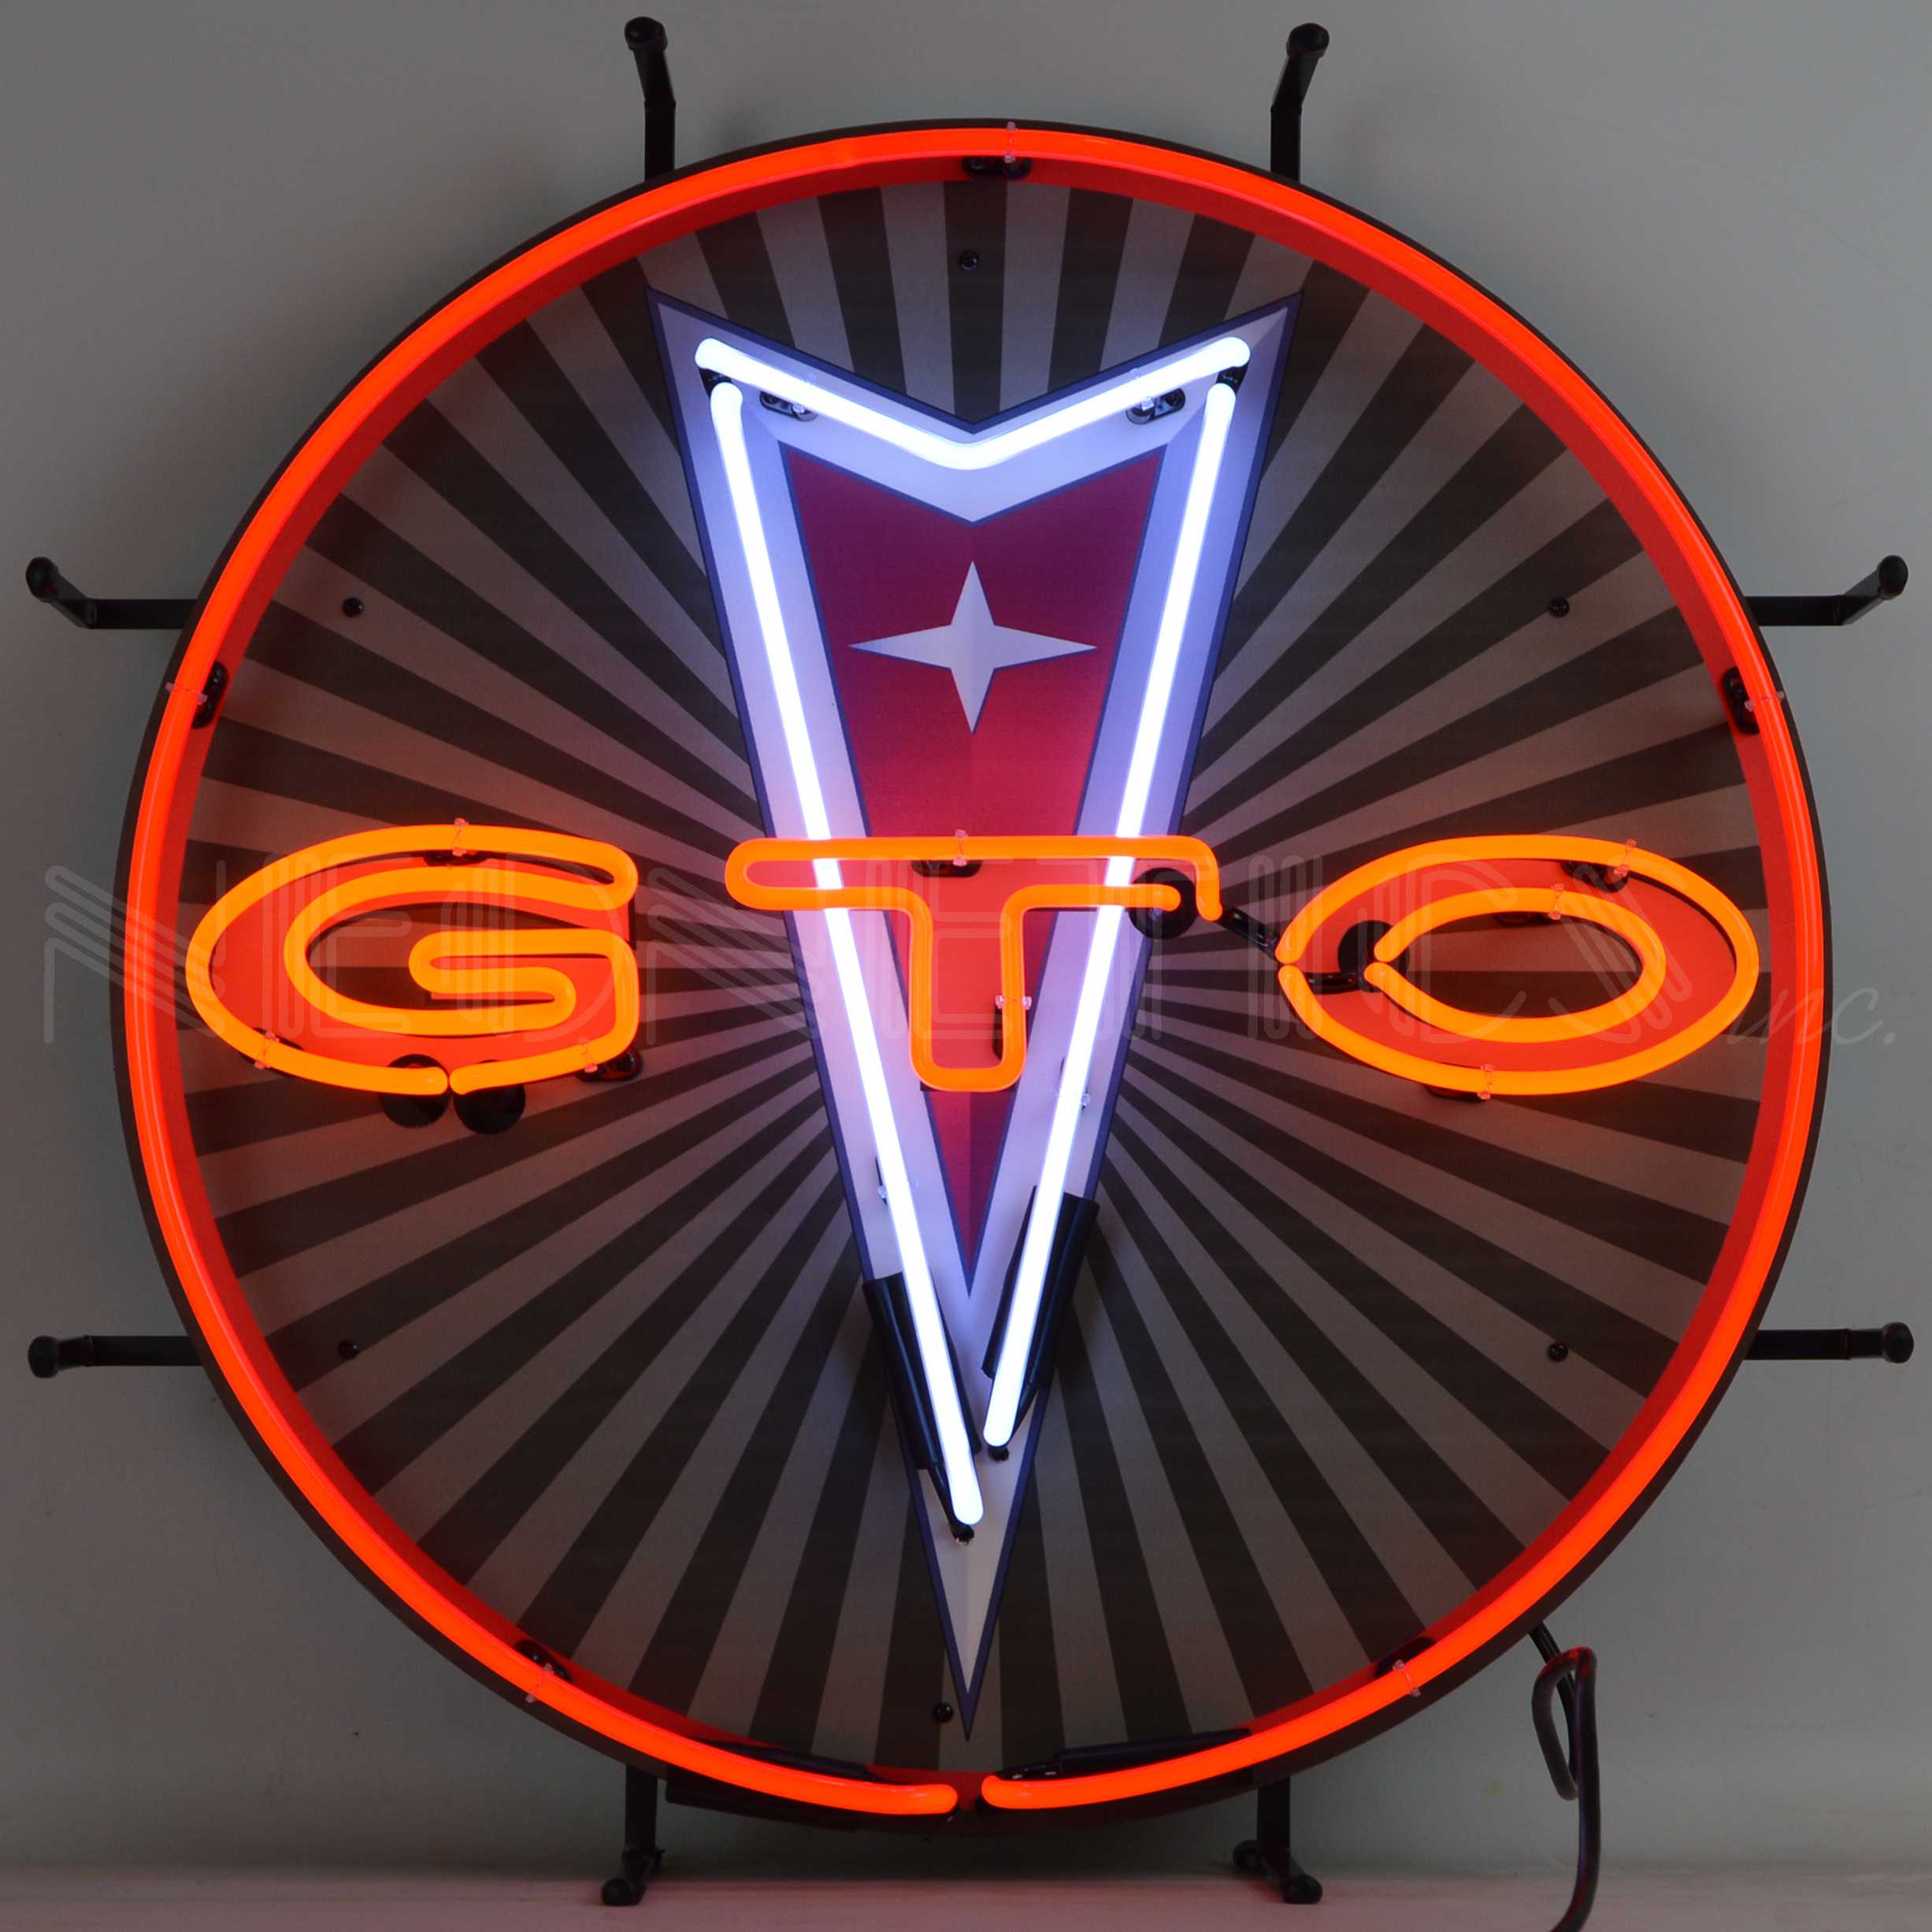 GTO PONTIAC NEON SIGN WITH BACKING